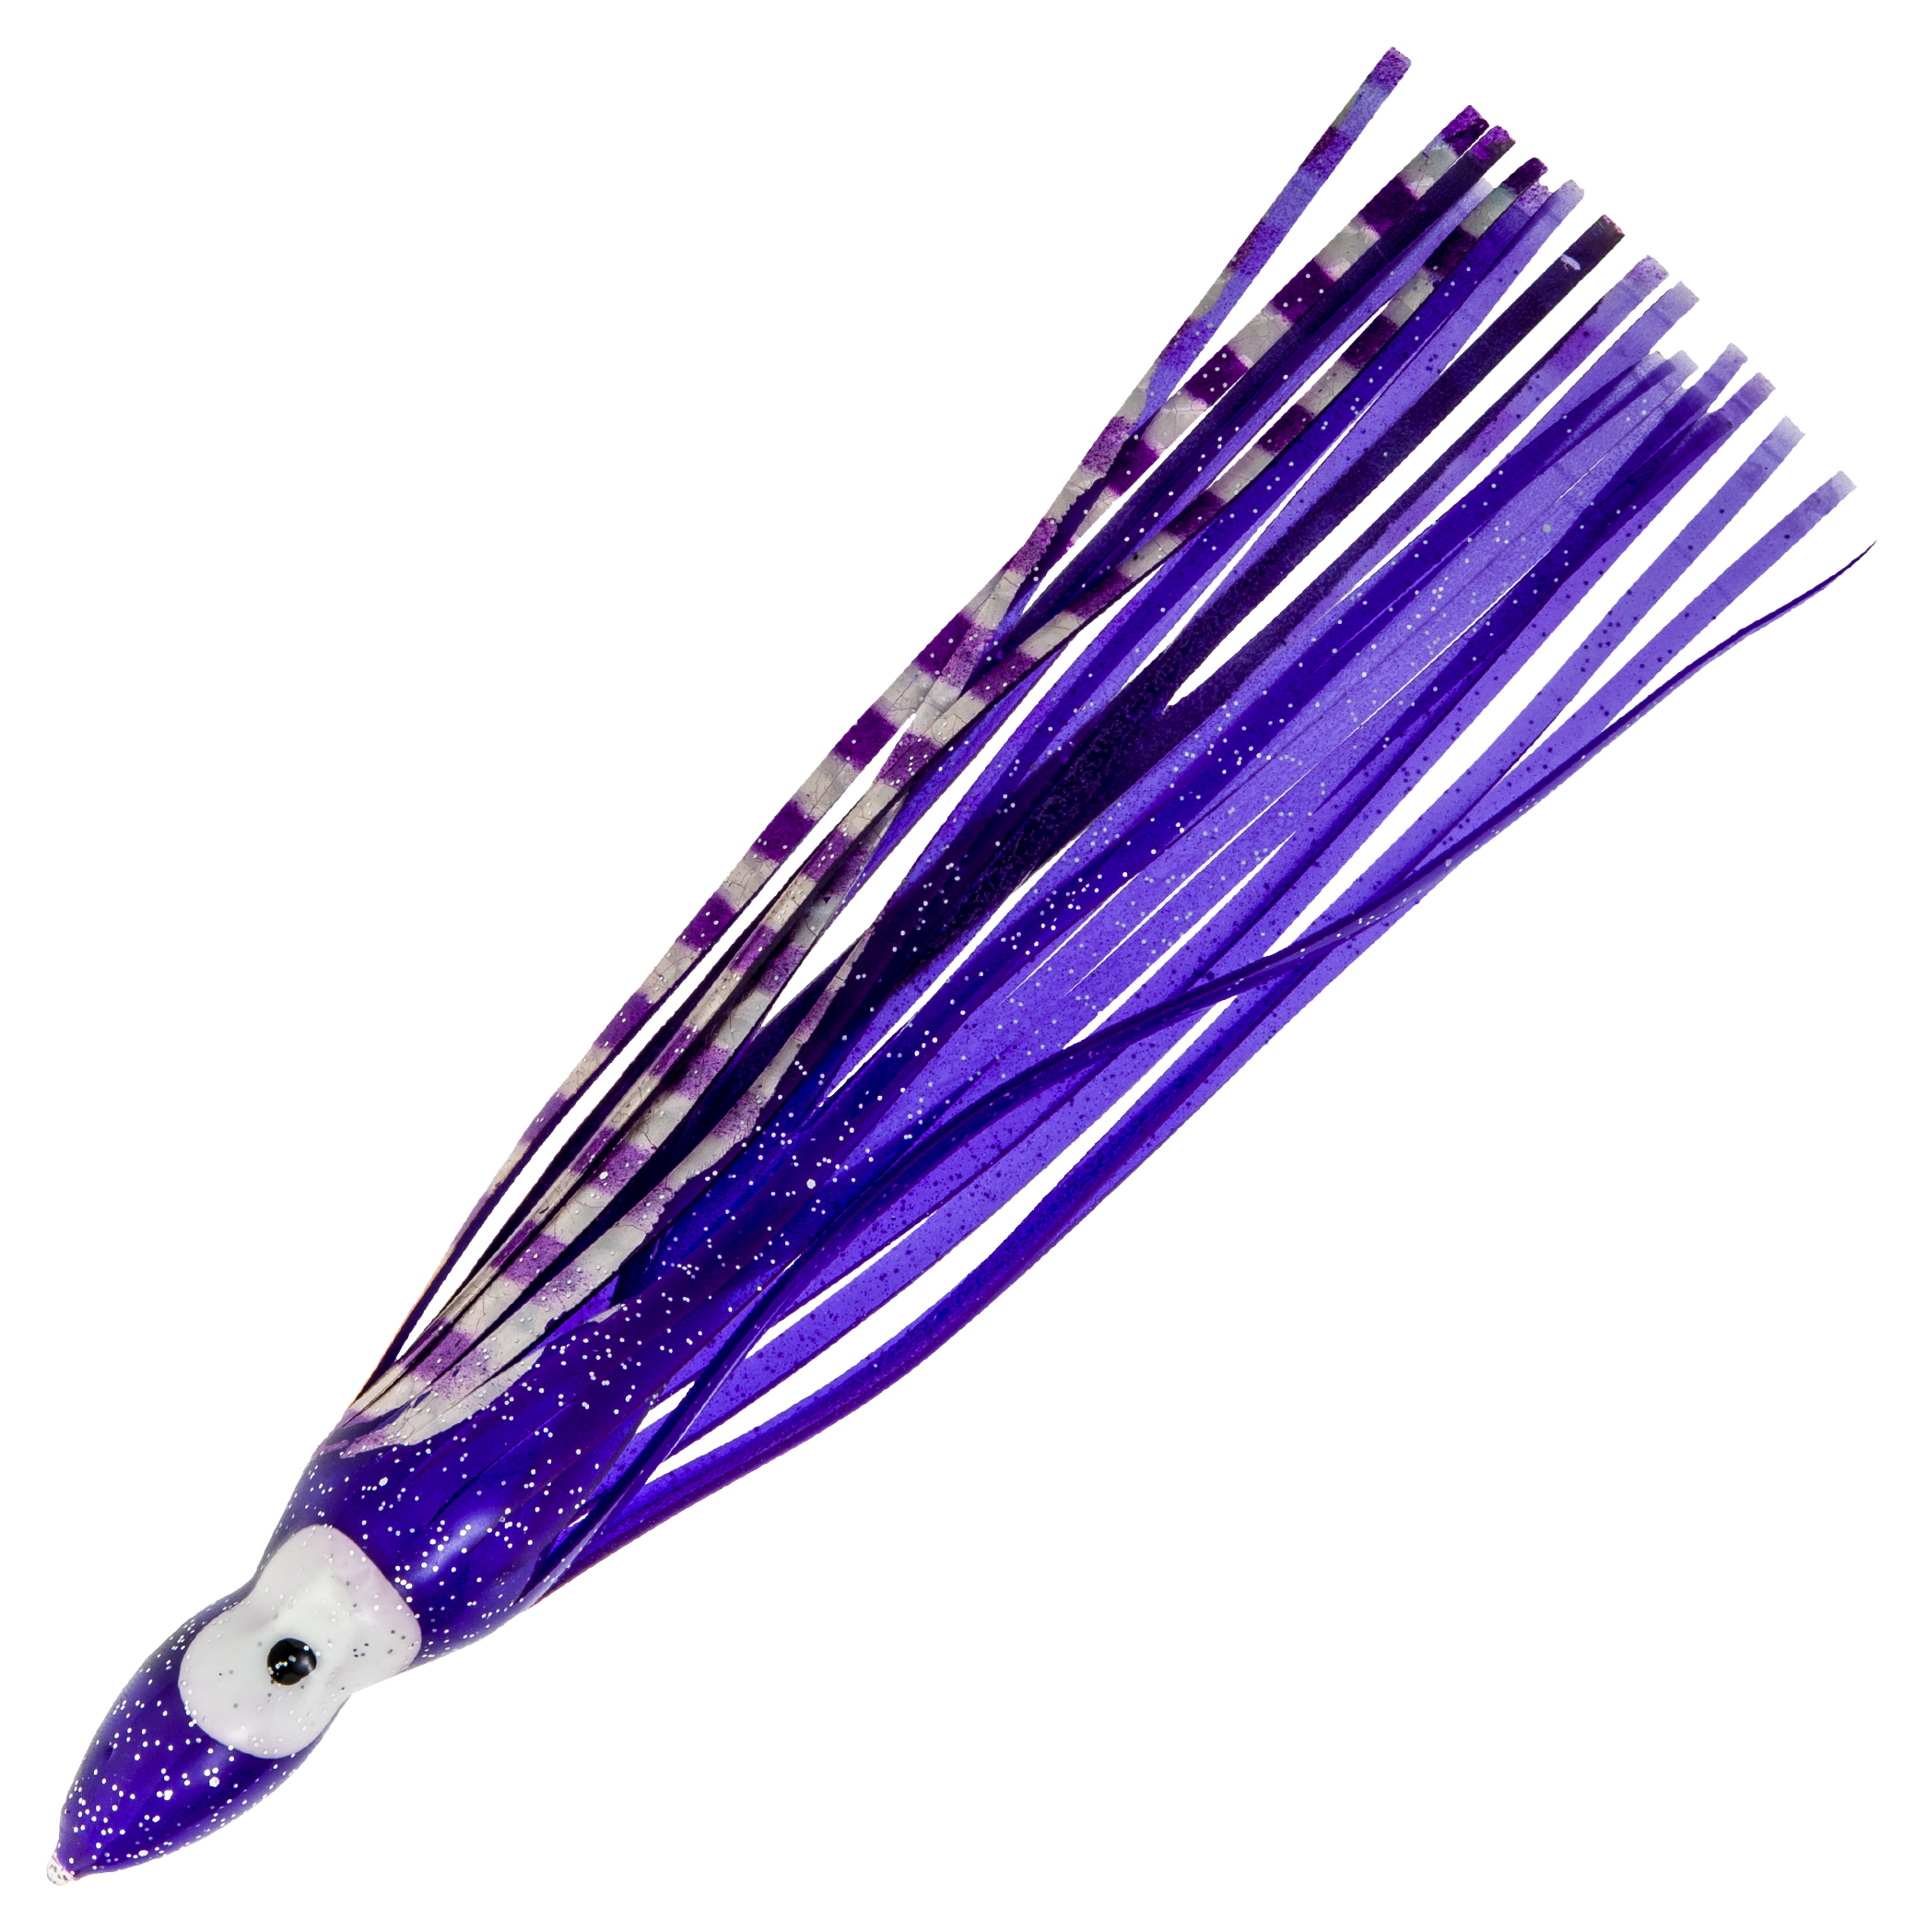 Offshore Angler Squid Skirts - 7-1/2' - Abalone Purple